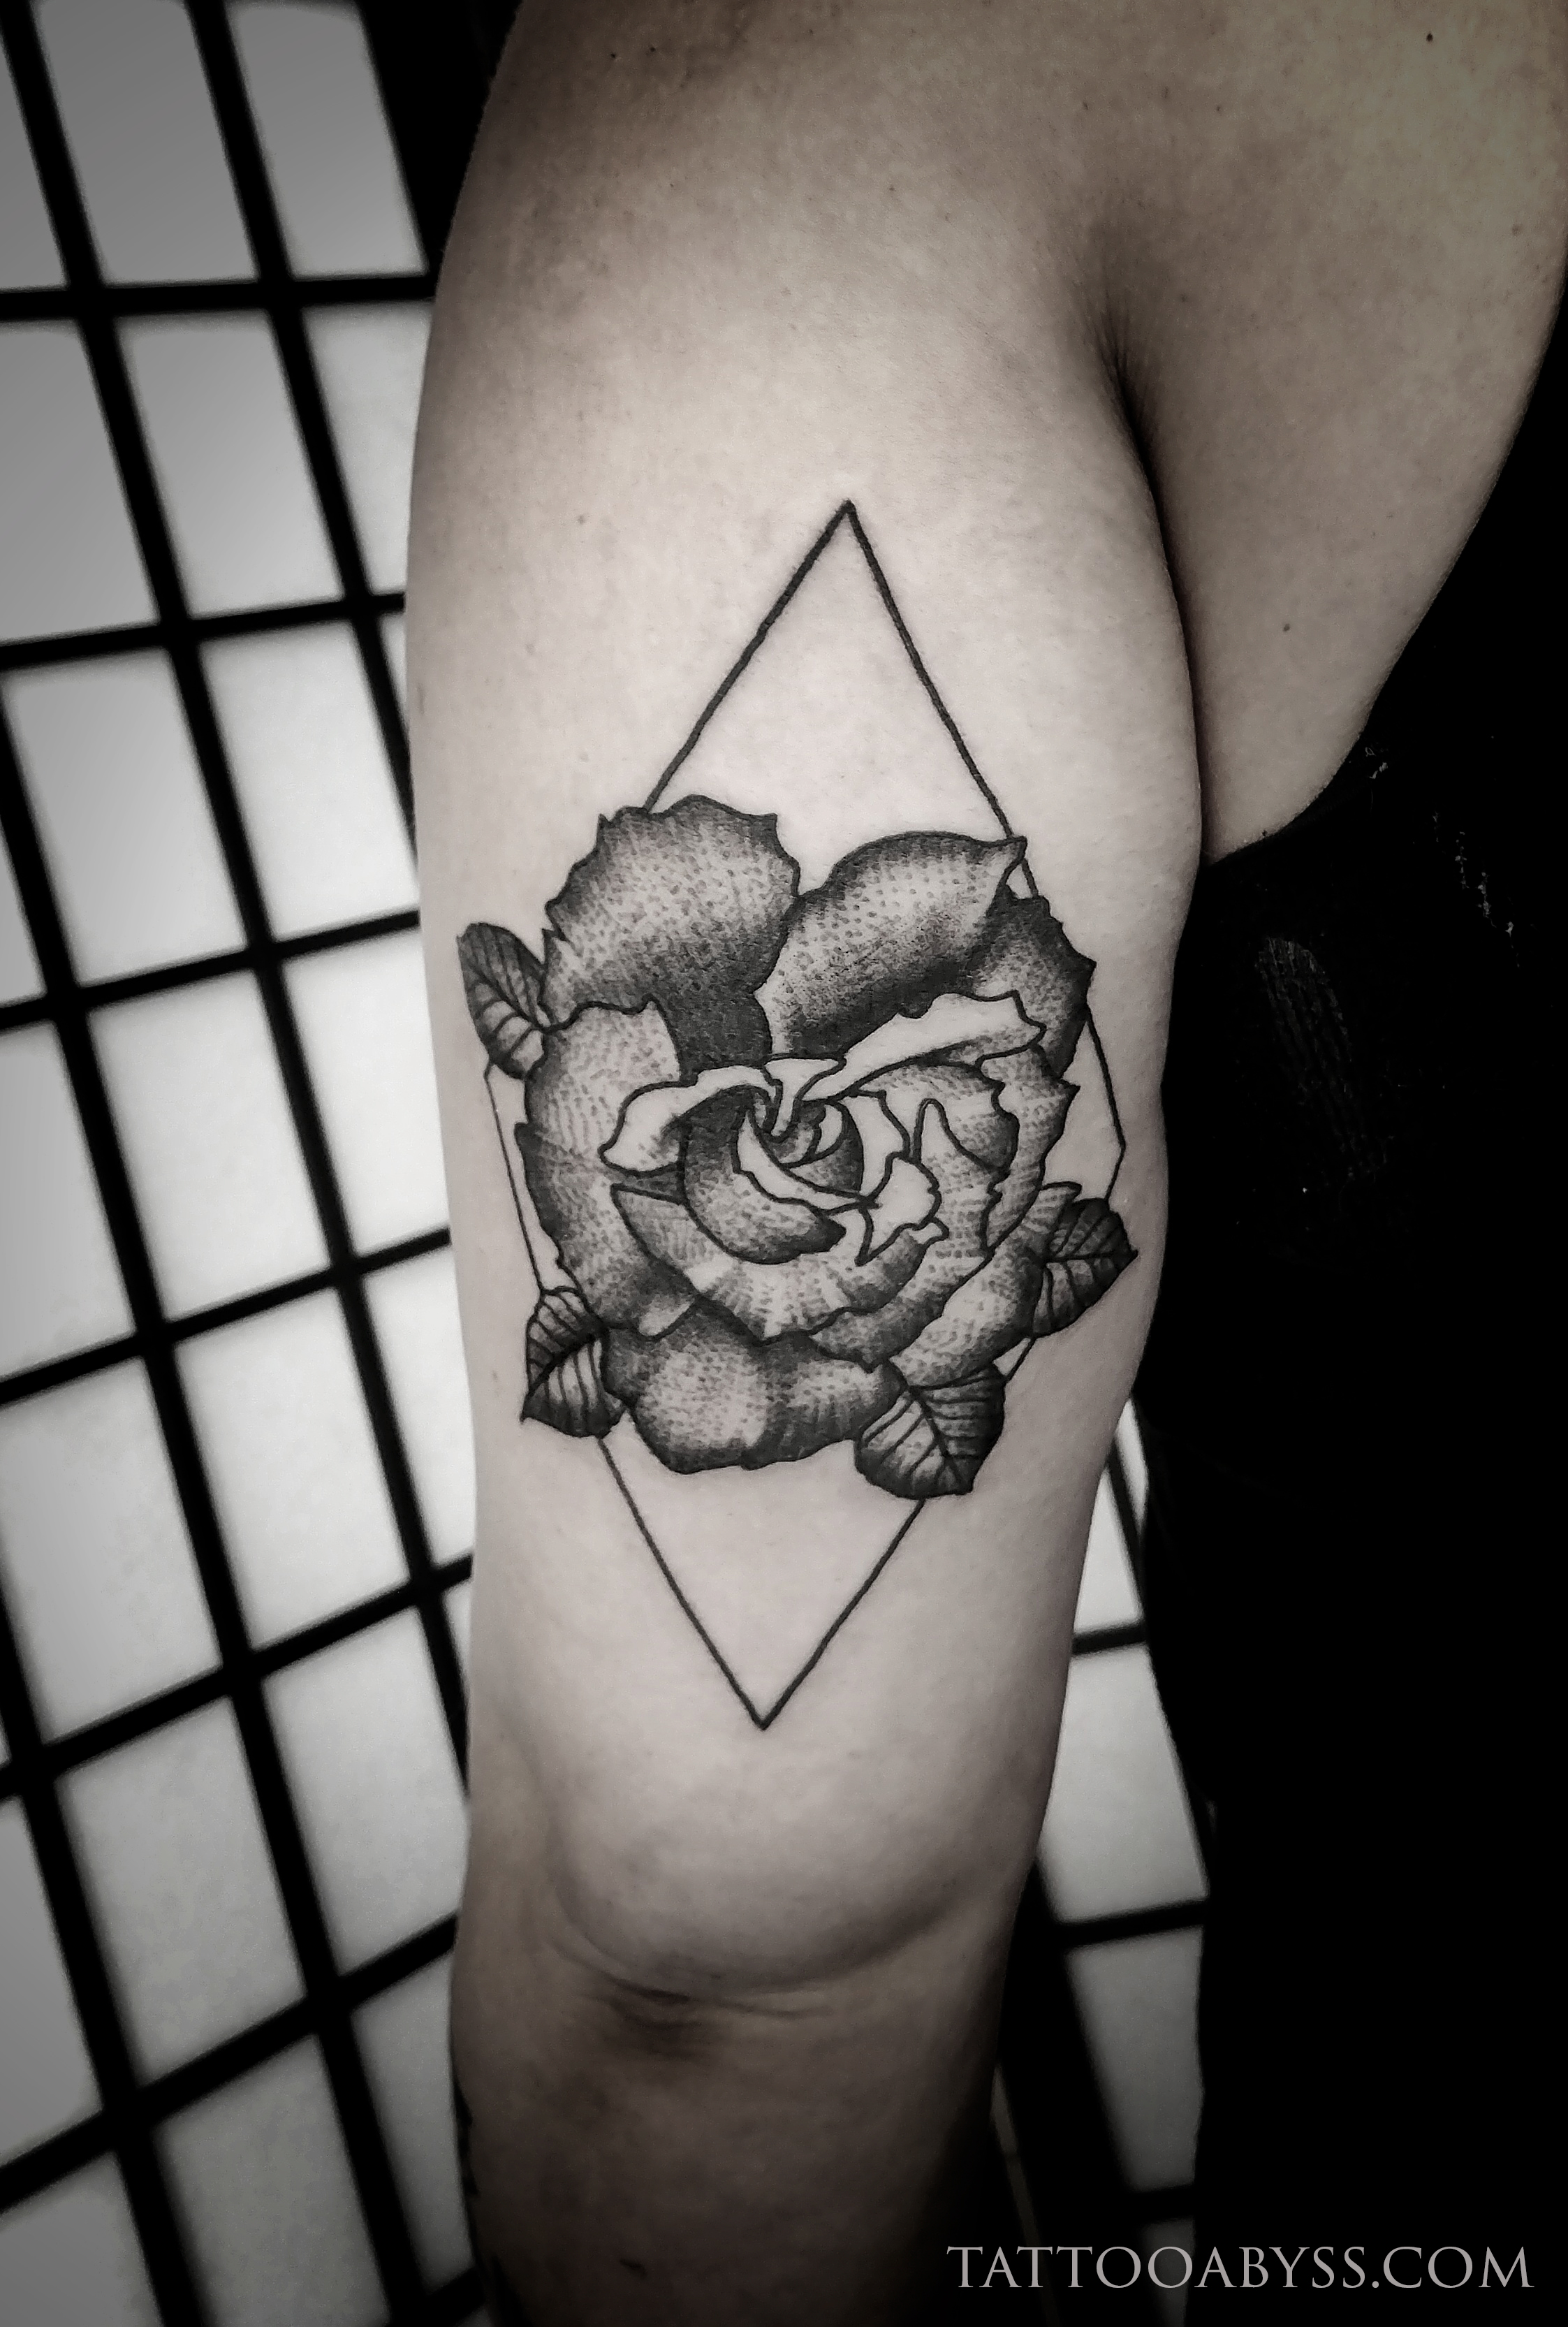 Blvk Temple Tattoo Cairns  Realism diamond  roses by our artist Matt  Blak  Contact us now or come see the crew at Cairns most premier tattoo  studio BLVK TEMPLE TATTOO 